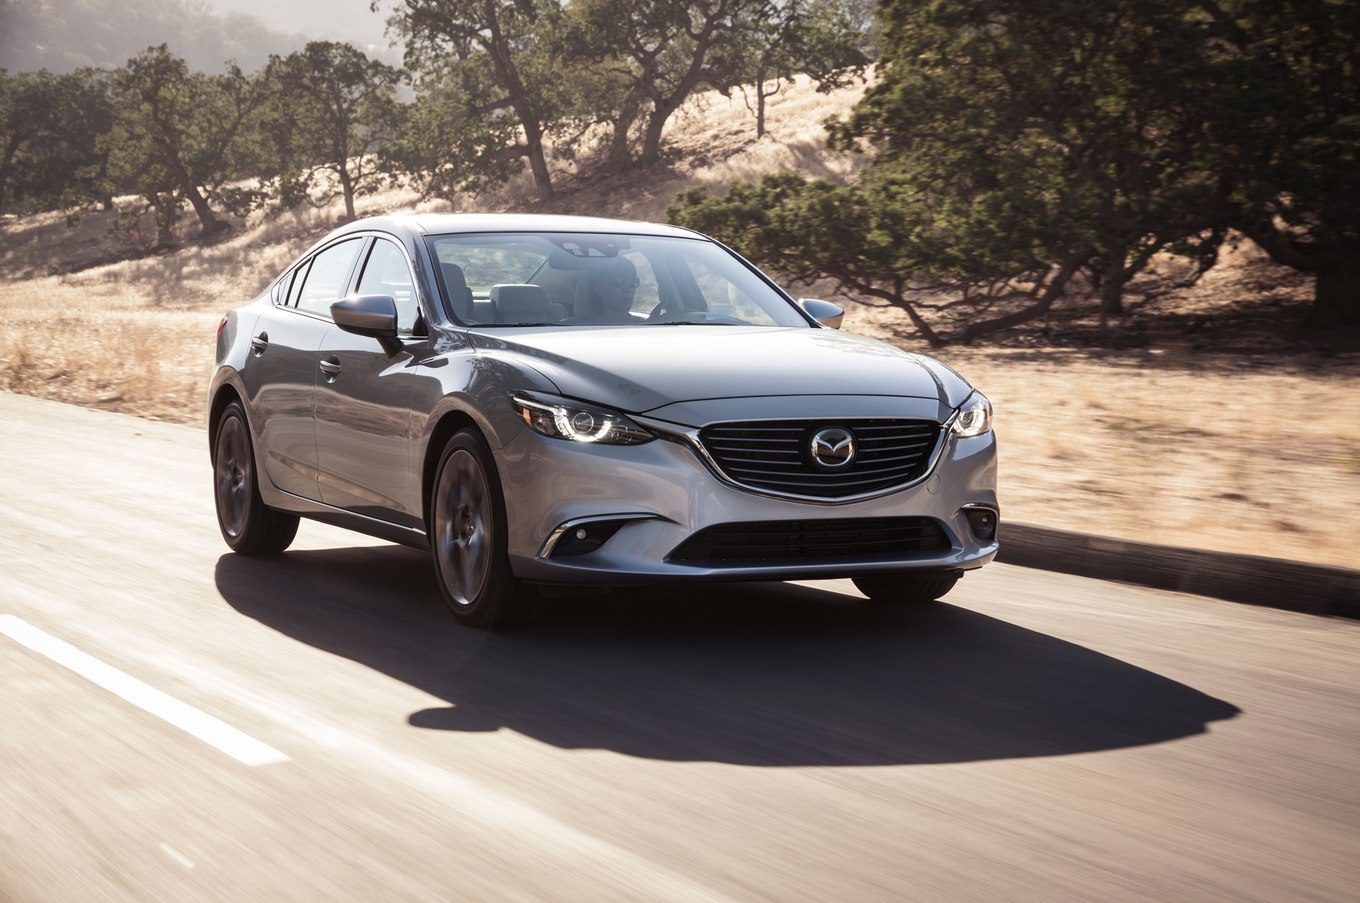 2016-Mazda6-front-three-quarters-in-motion.jpg